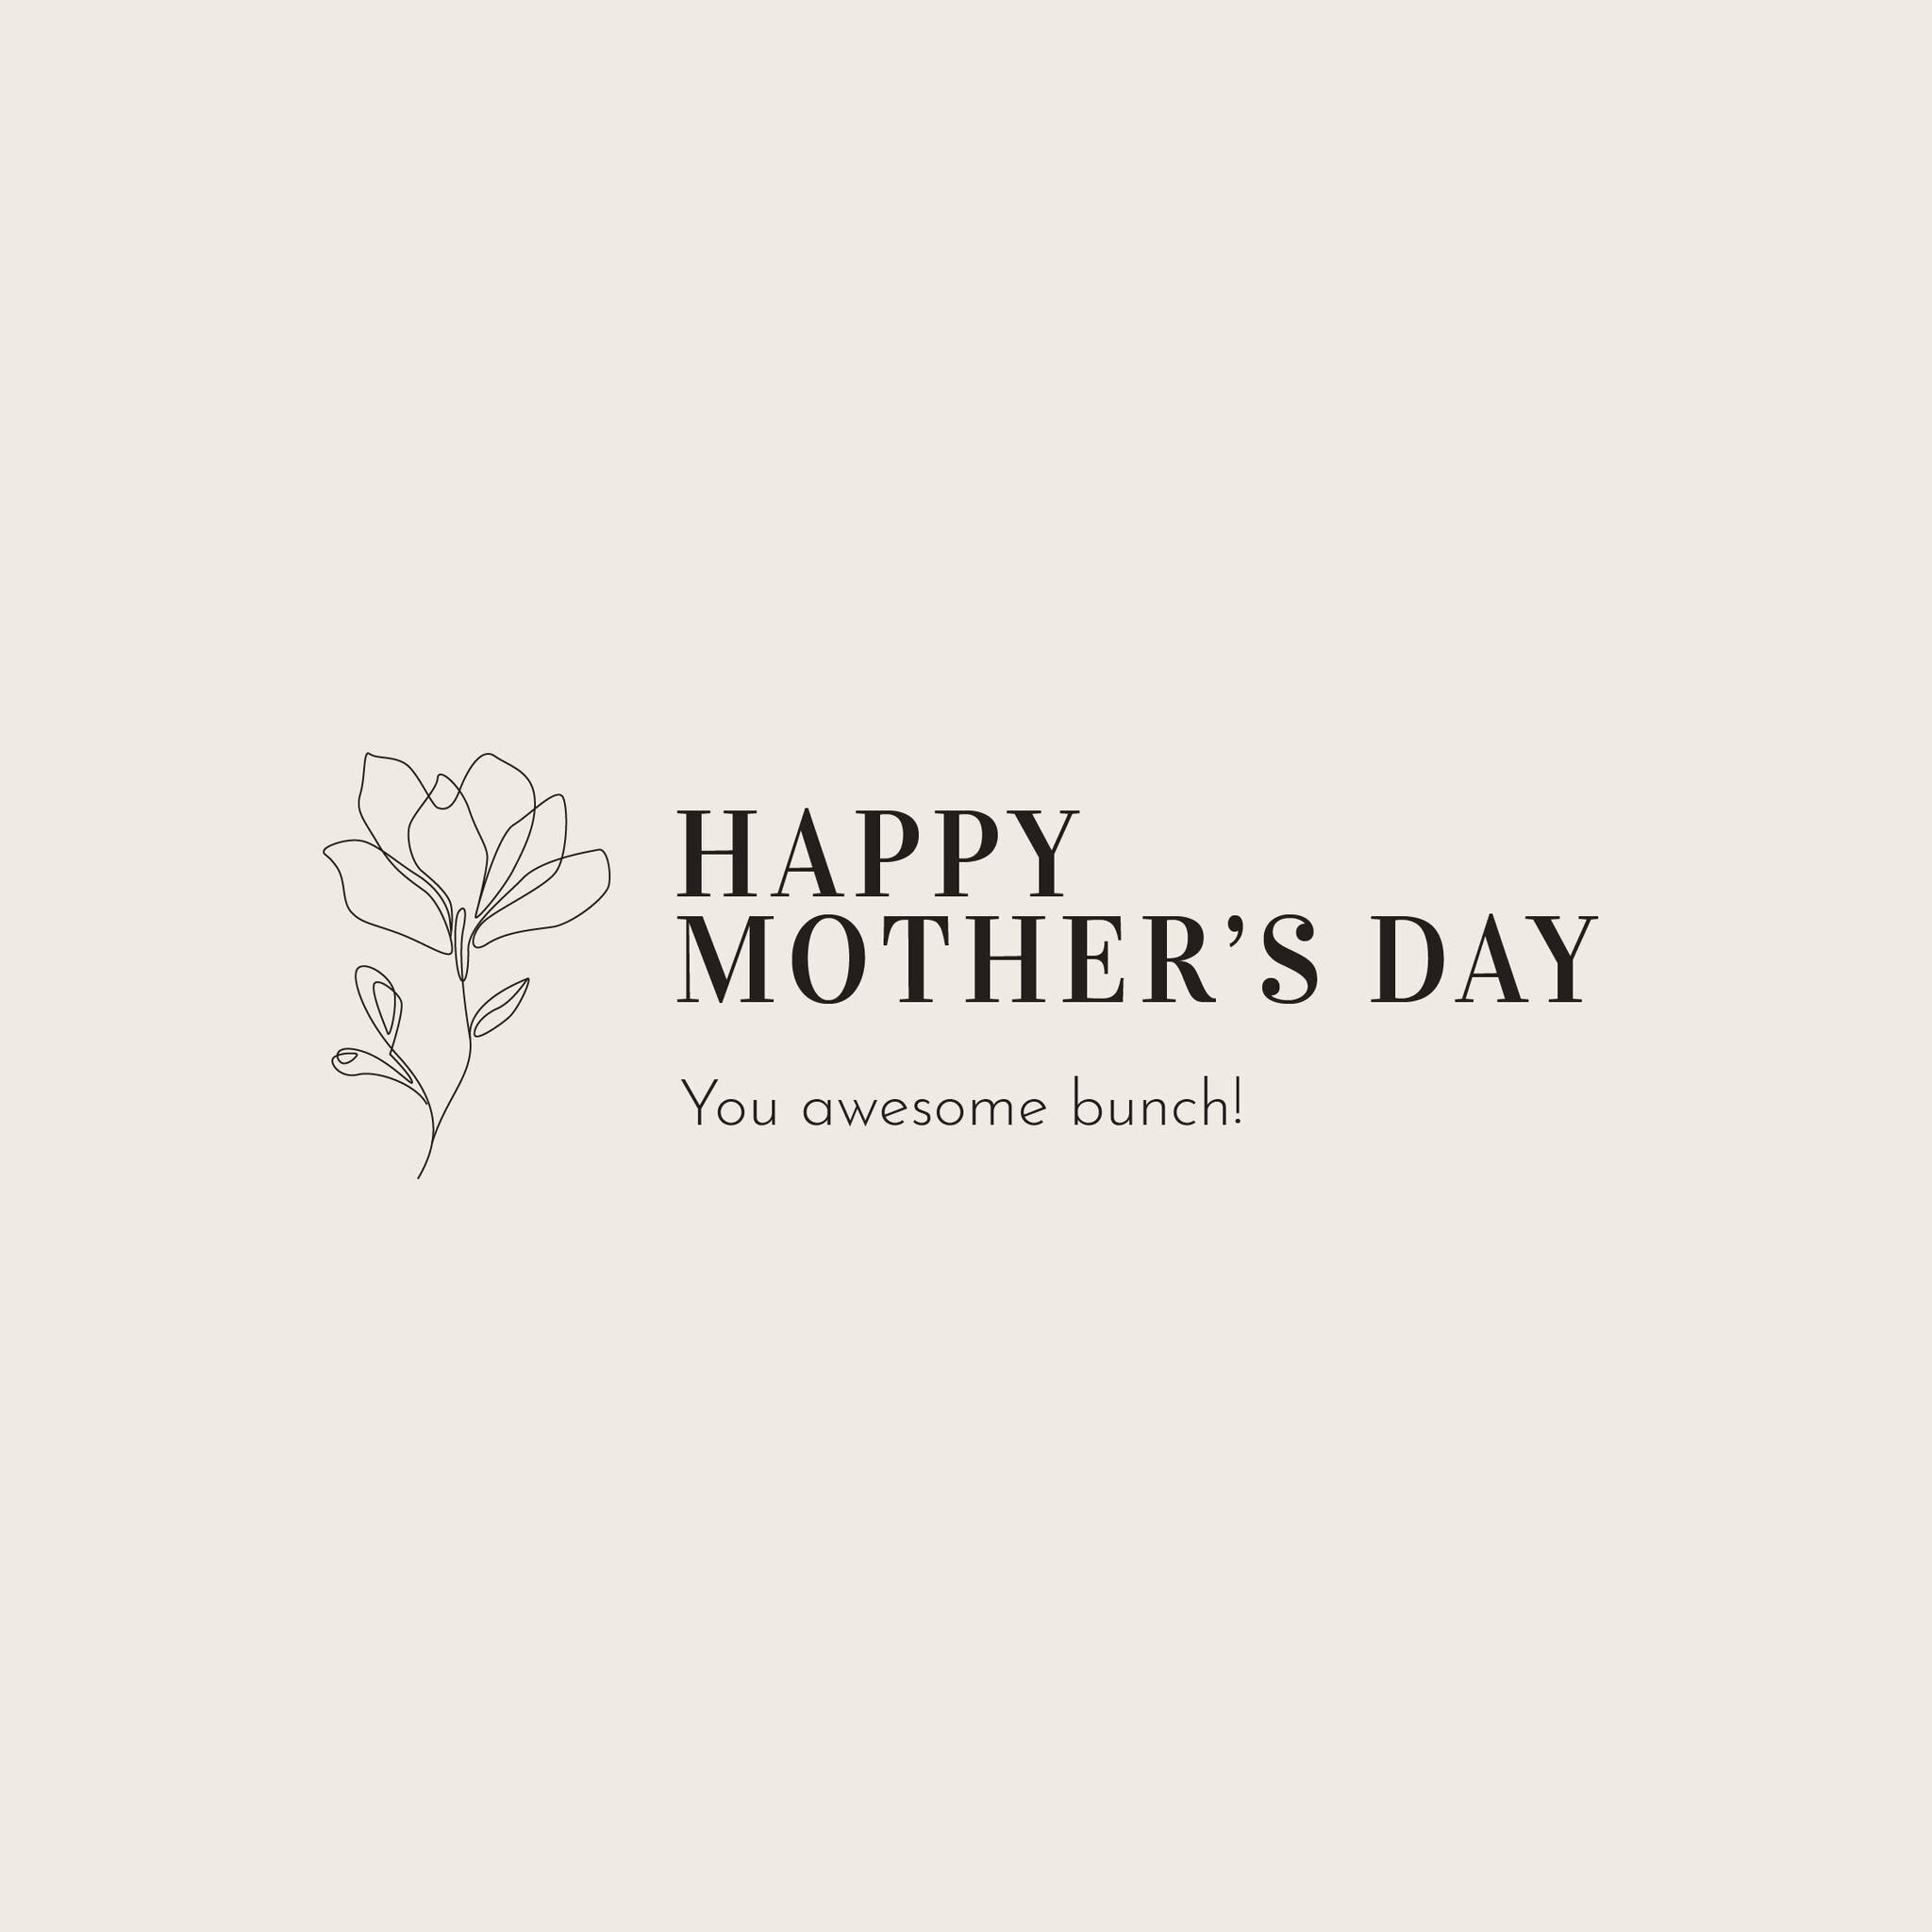 Happy Mother's Day to all the wonderful mums, soon-to-be mums and those holding their mums in their hearts today 💐✨

If today hits a little differently for someone you know, be the shoulder to lean on 🫶

.
.
.

#mothersday #happymothersday #mother 